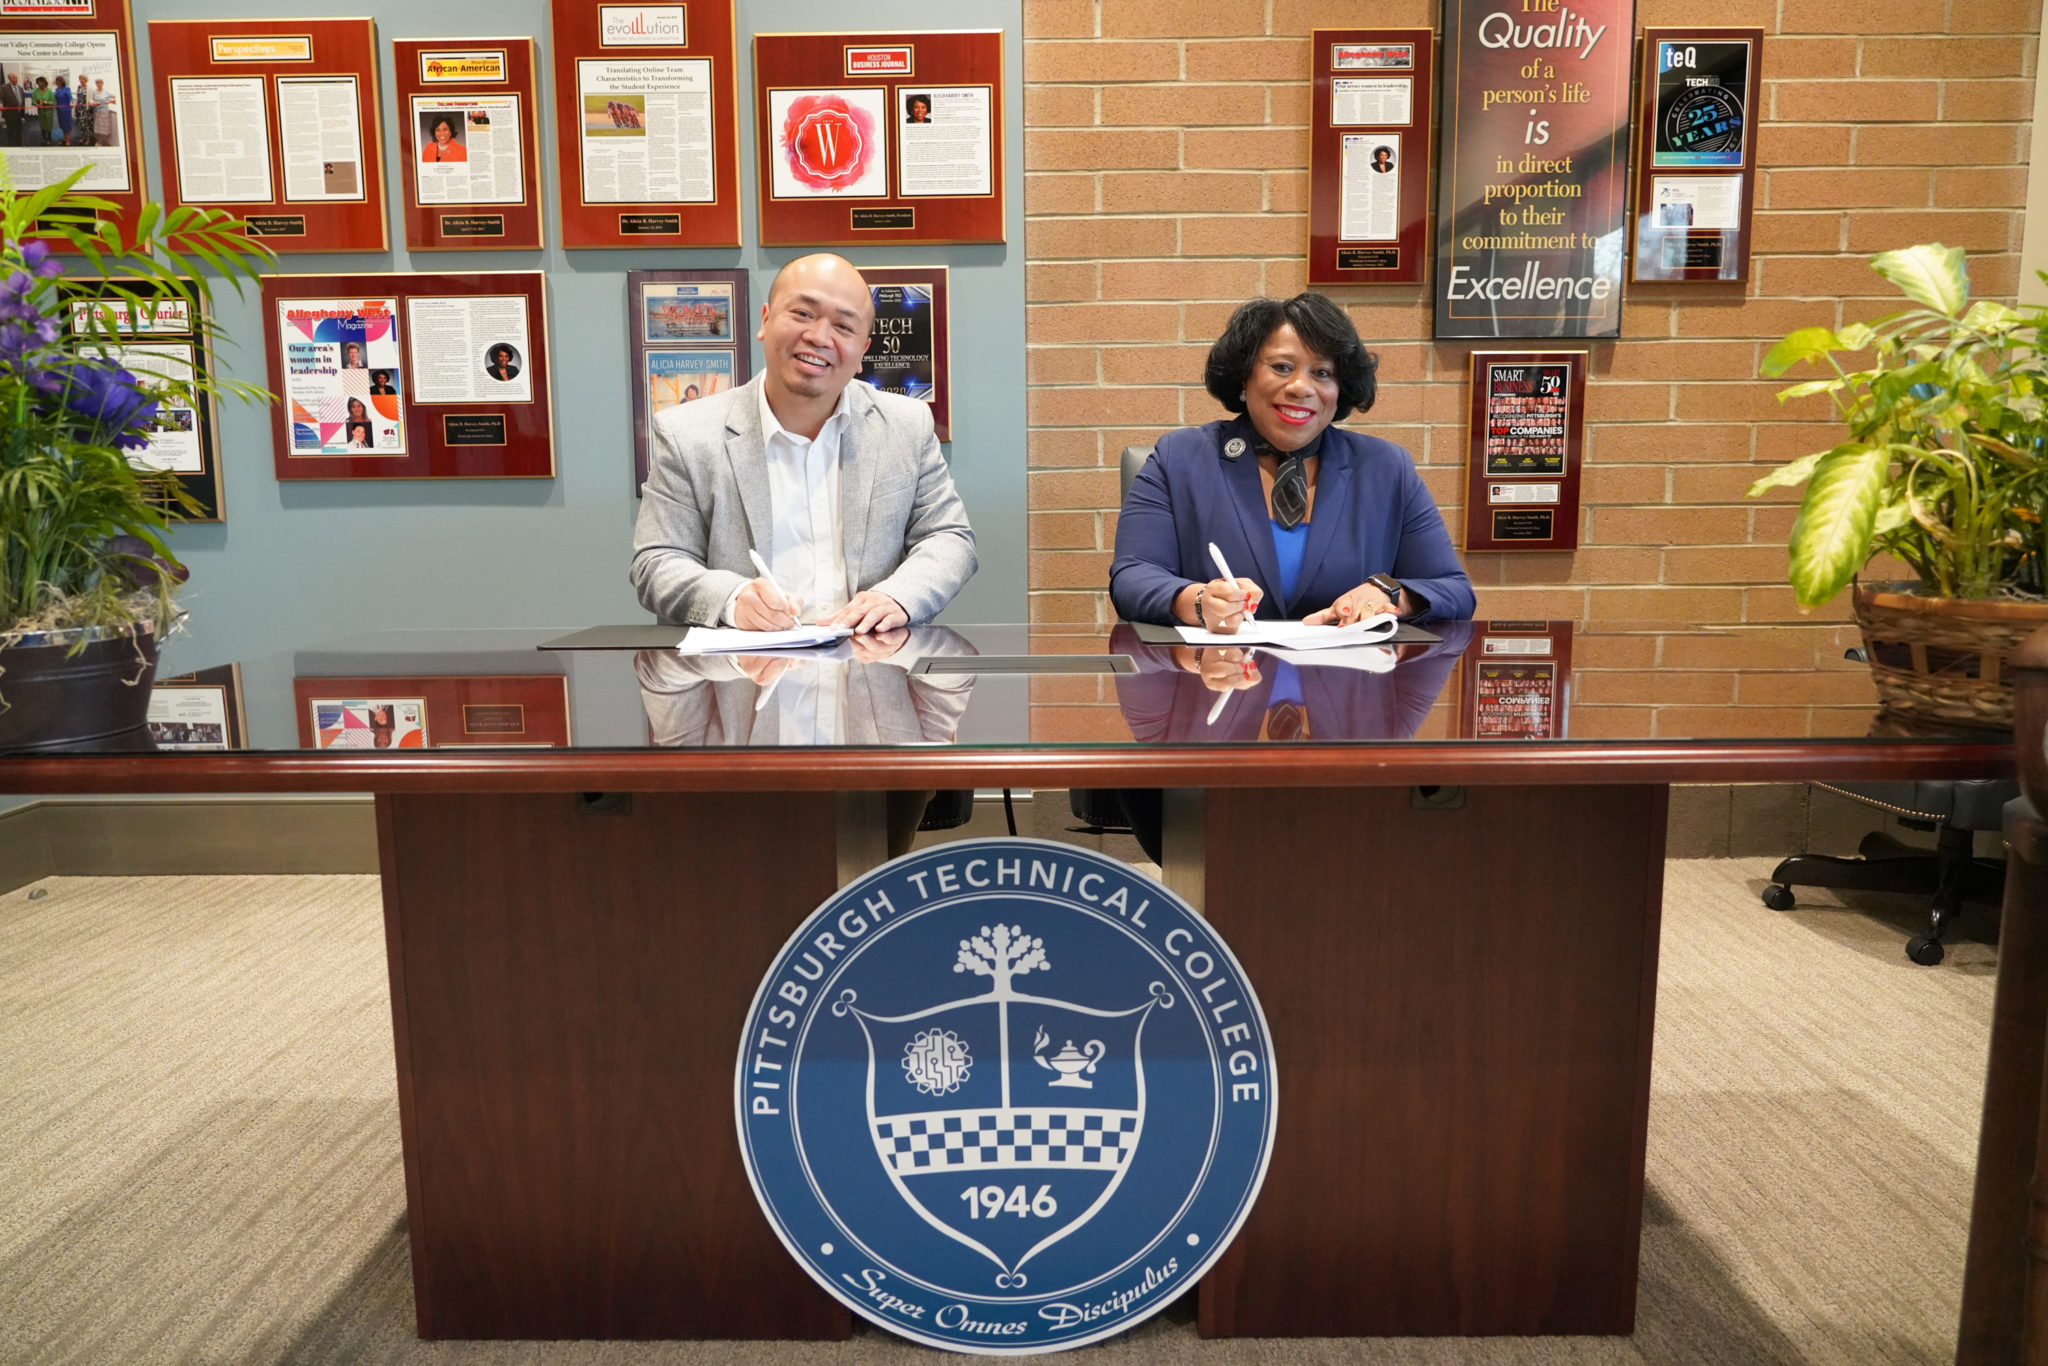 Ceremonial articulation agreement signing